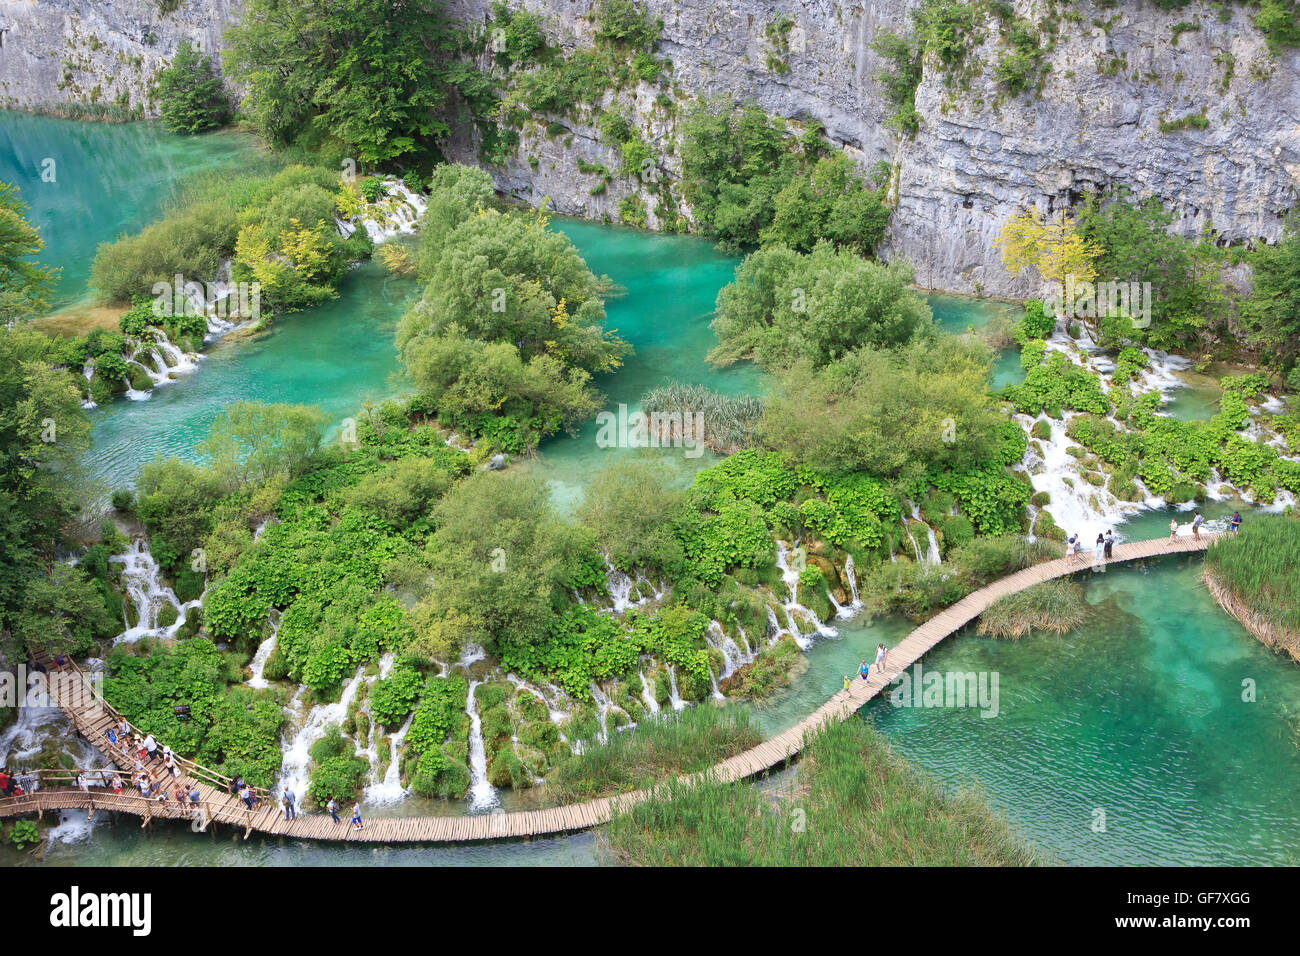 Waterfalls at the Plitvice Lakes National Park in Croatia Stock Photo